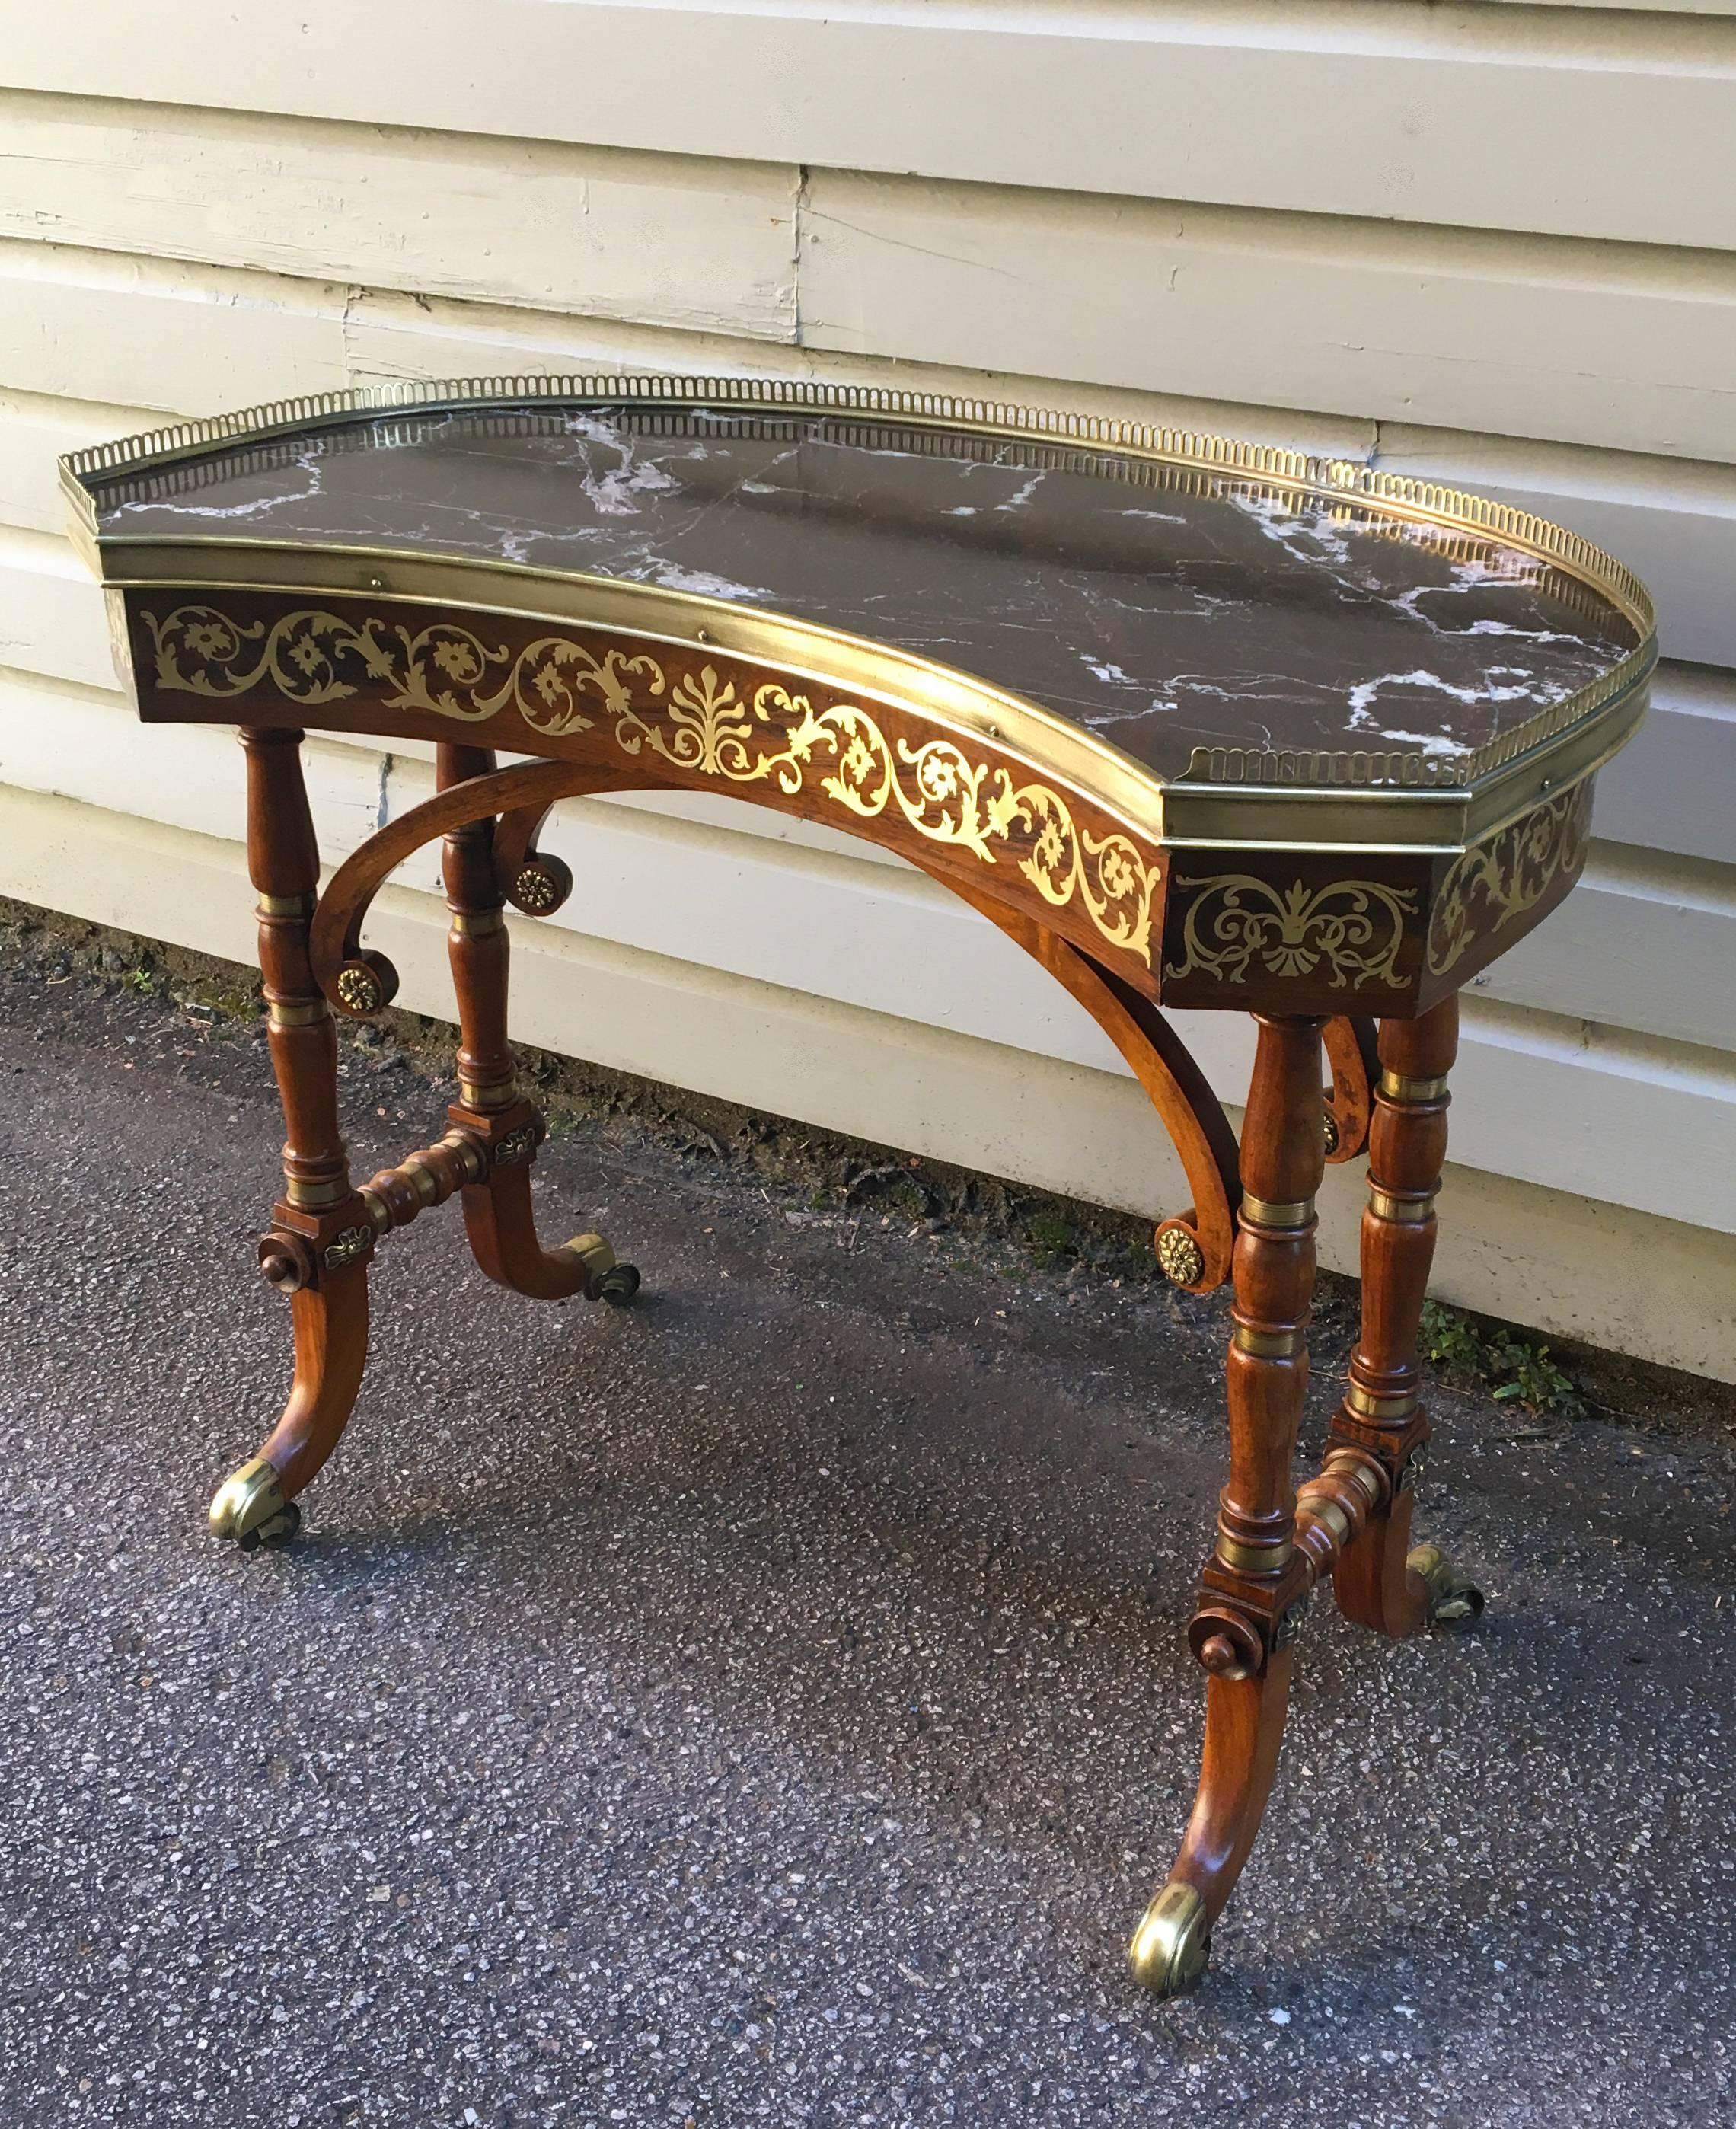 An early 19th century English Regency rosewood library/dressing table attributed to John McLean. This table is kidney shaped with floral designed inlaid brass (Boulle inlay). Marble top surrounded by cast brass gallery. Beautiful trestle base with